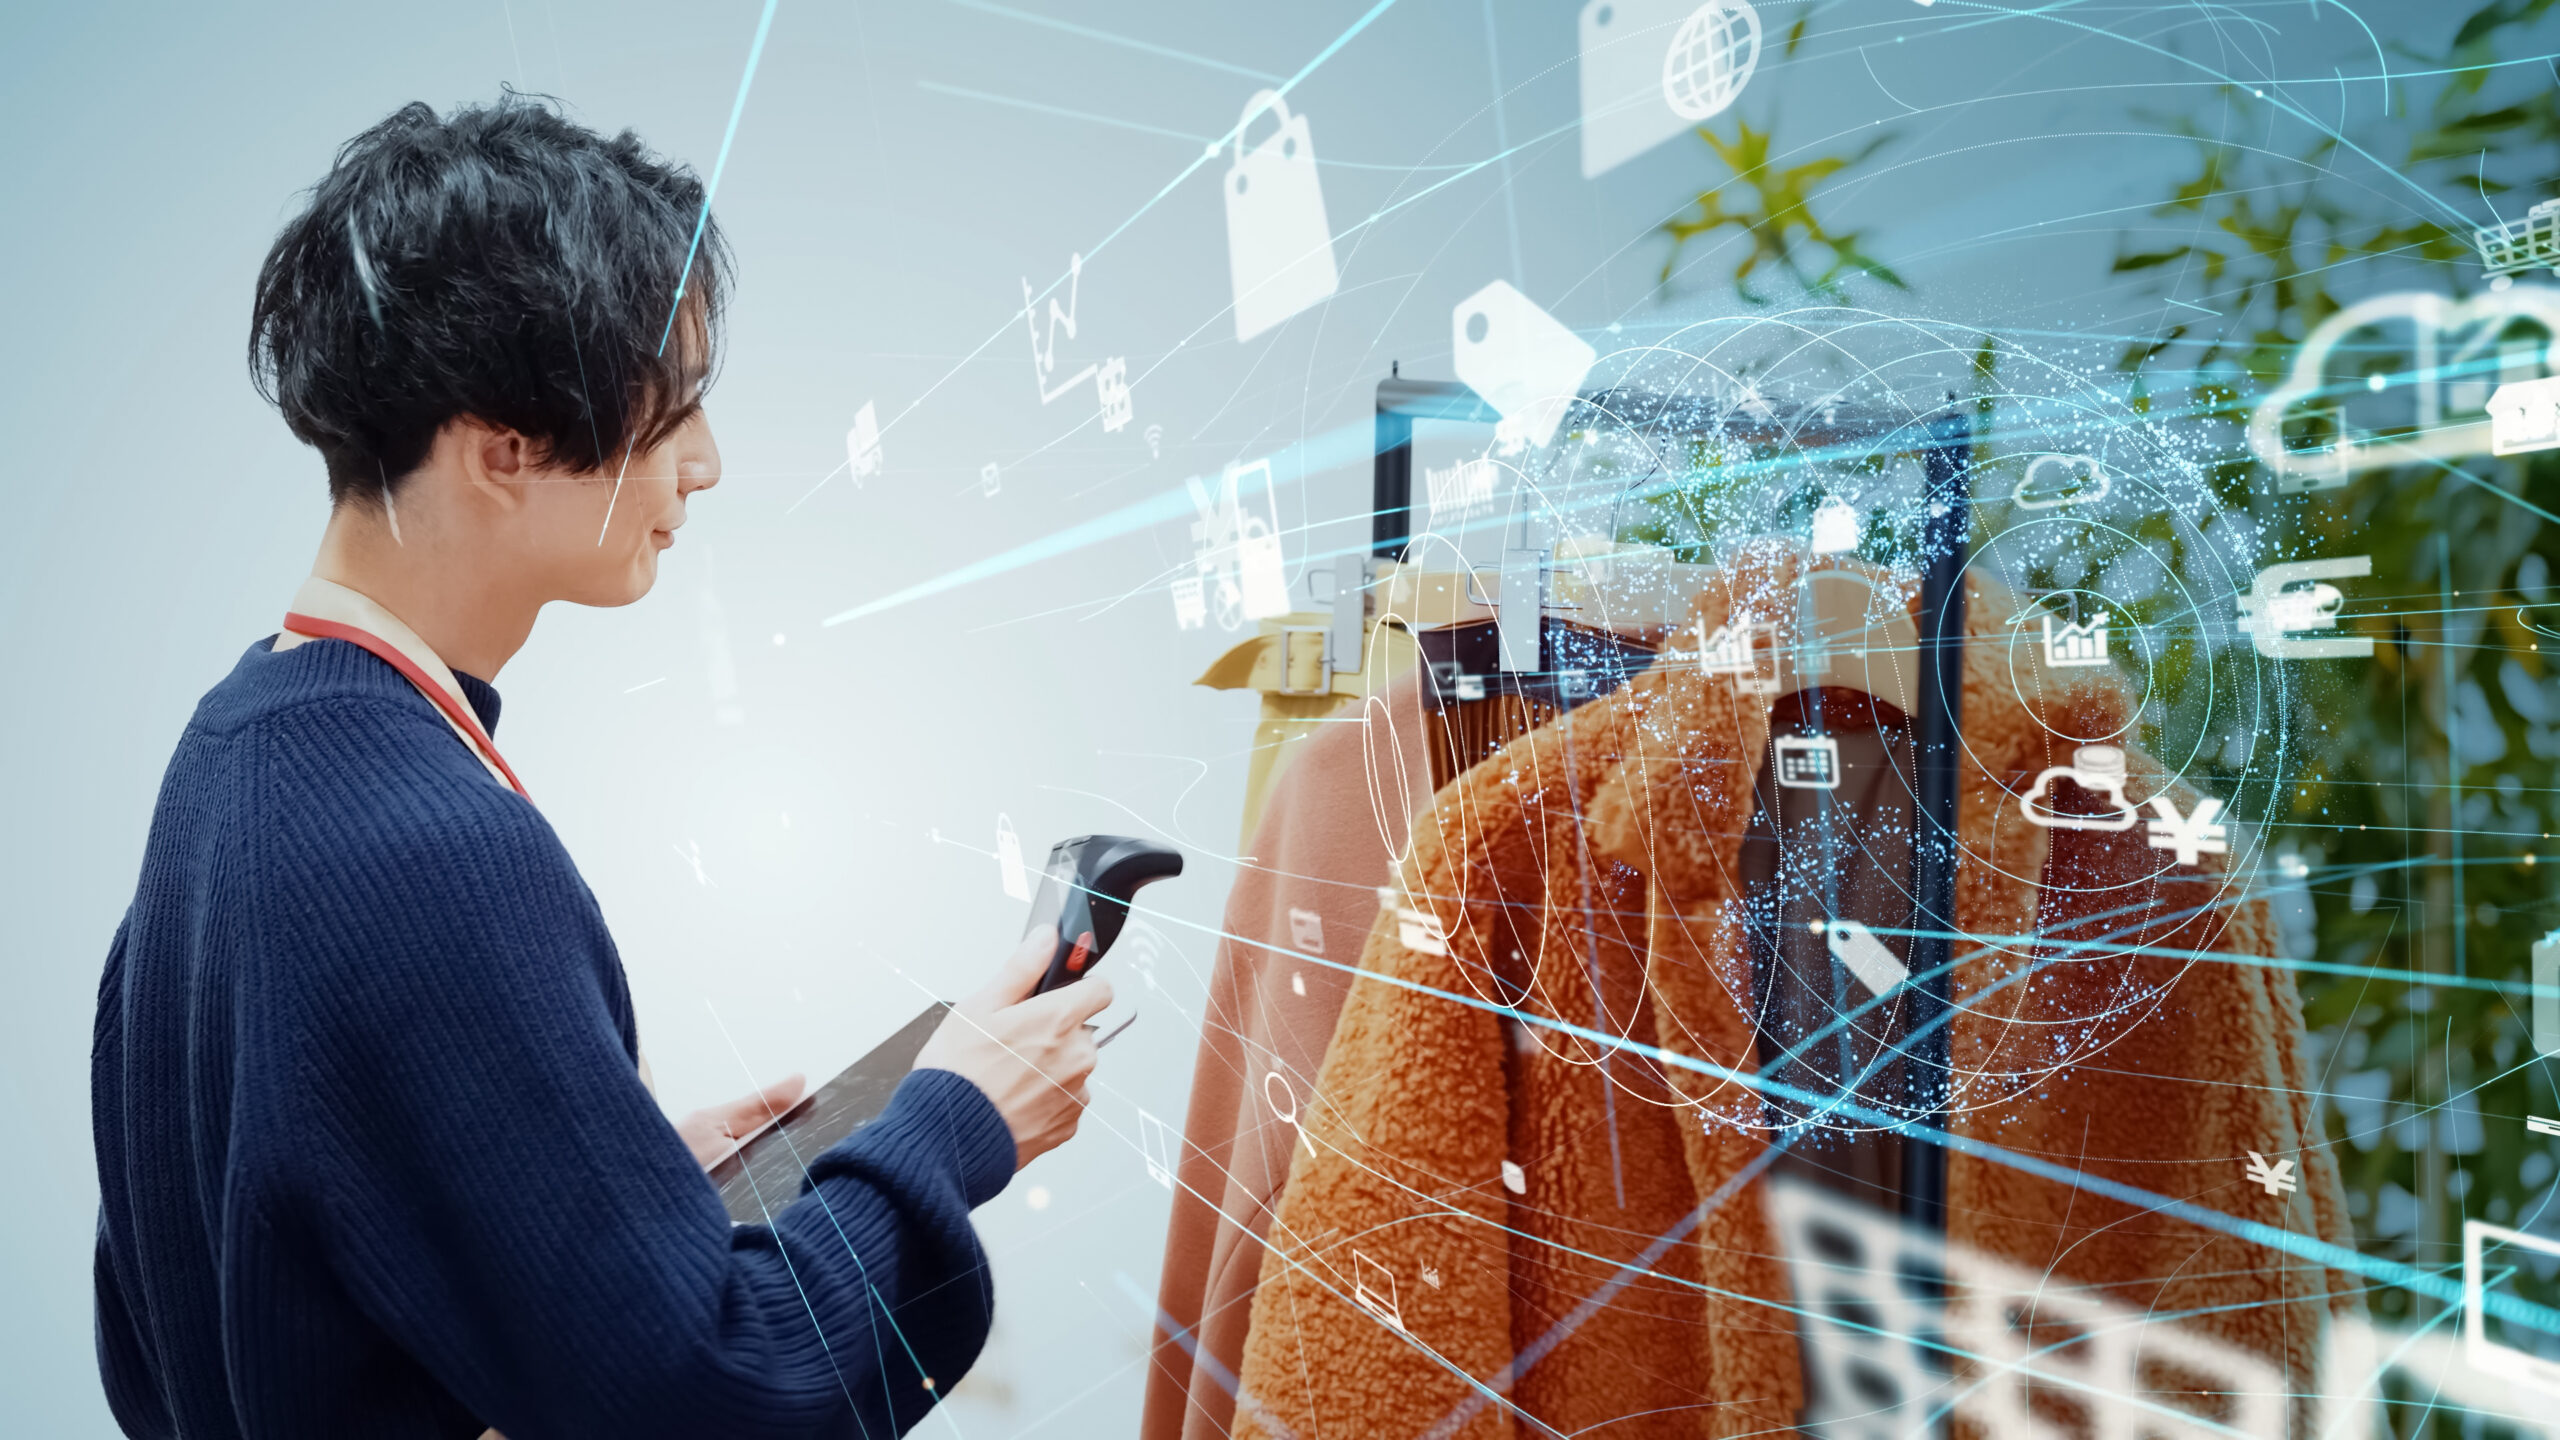 RFID for retail makes it possible for retailers to track inventory, automate workflows, monitor stock levels, check prices and improve customer service.